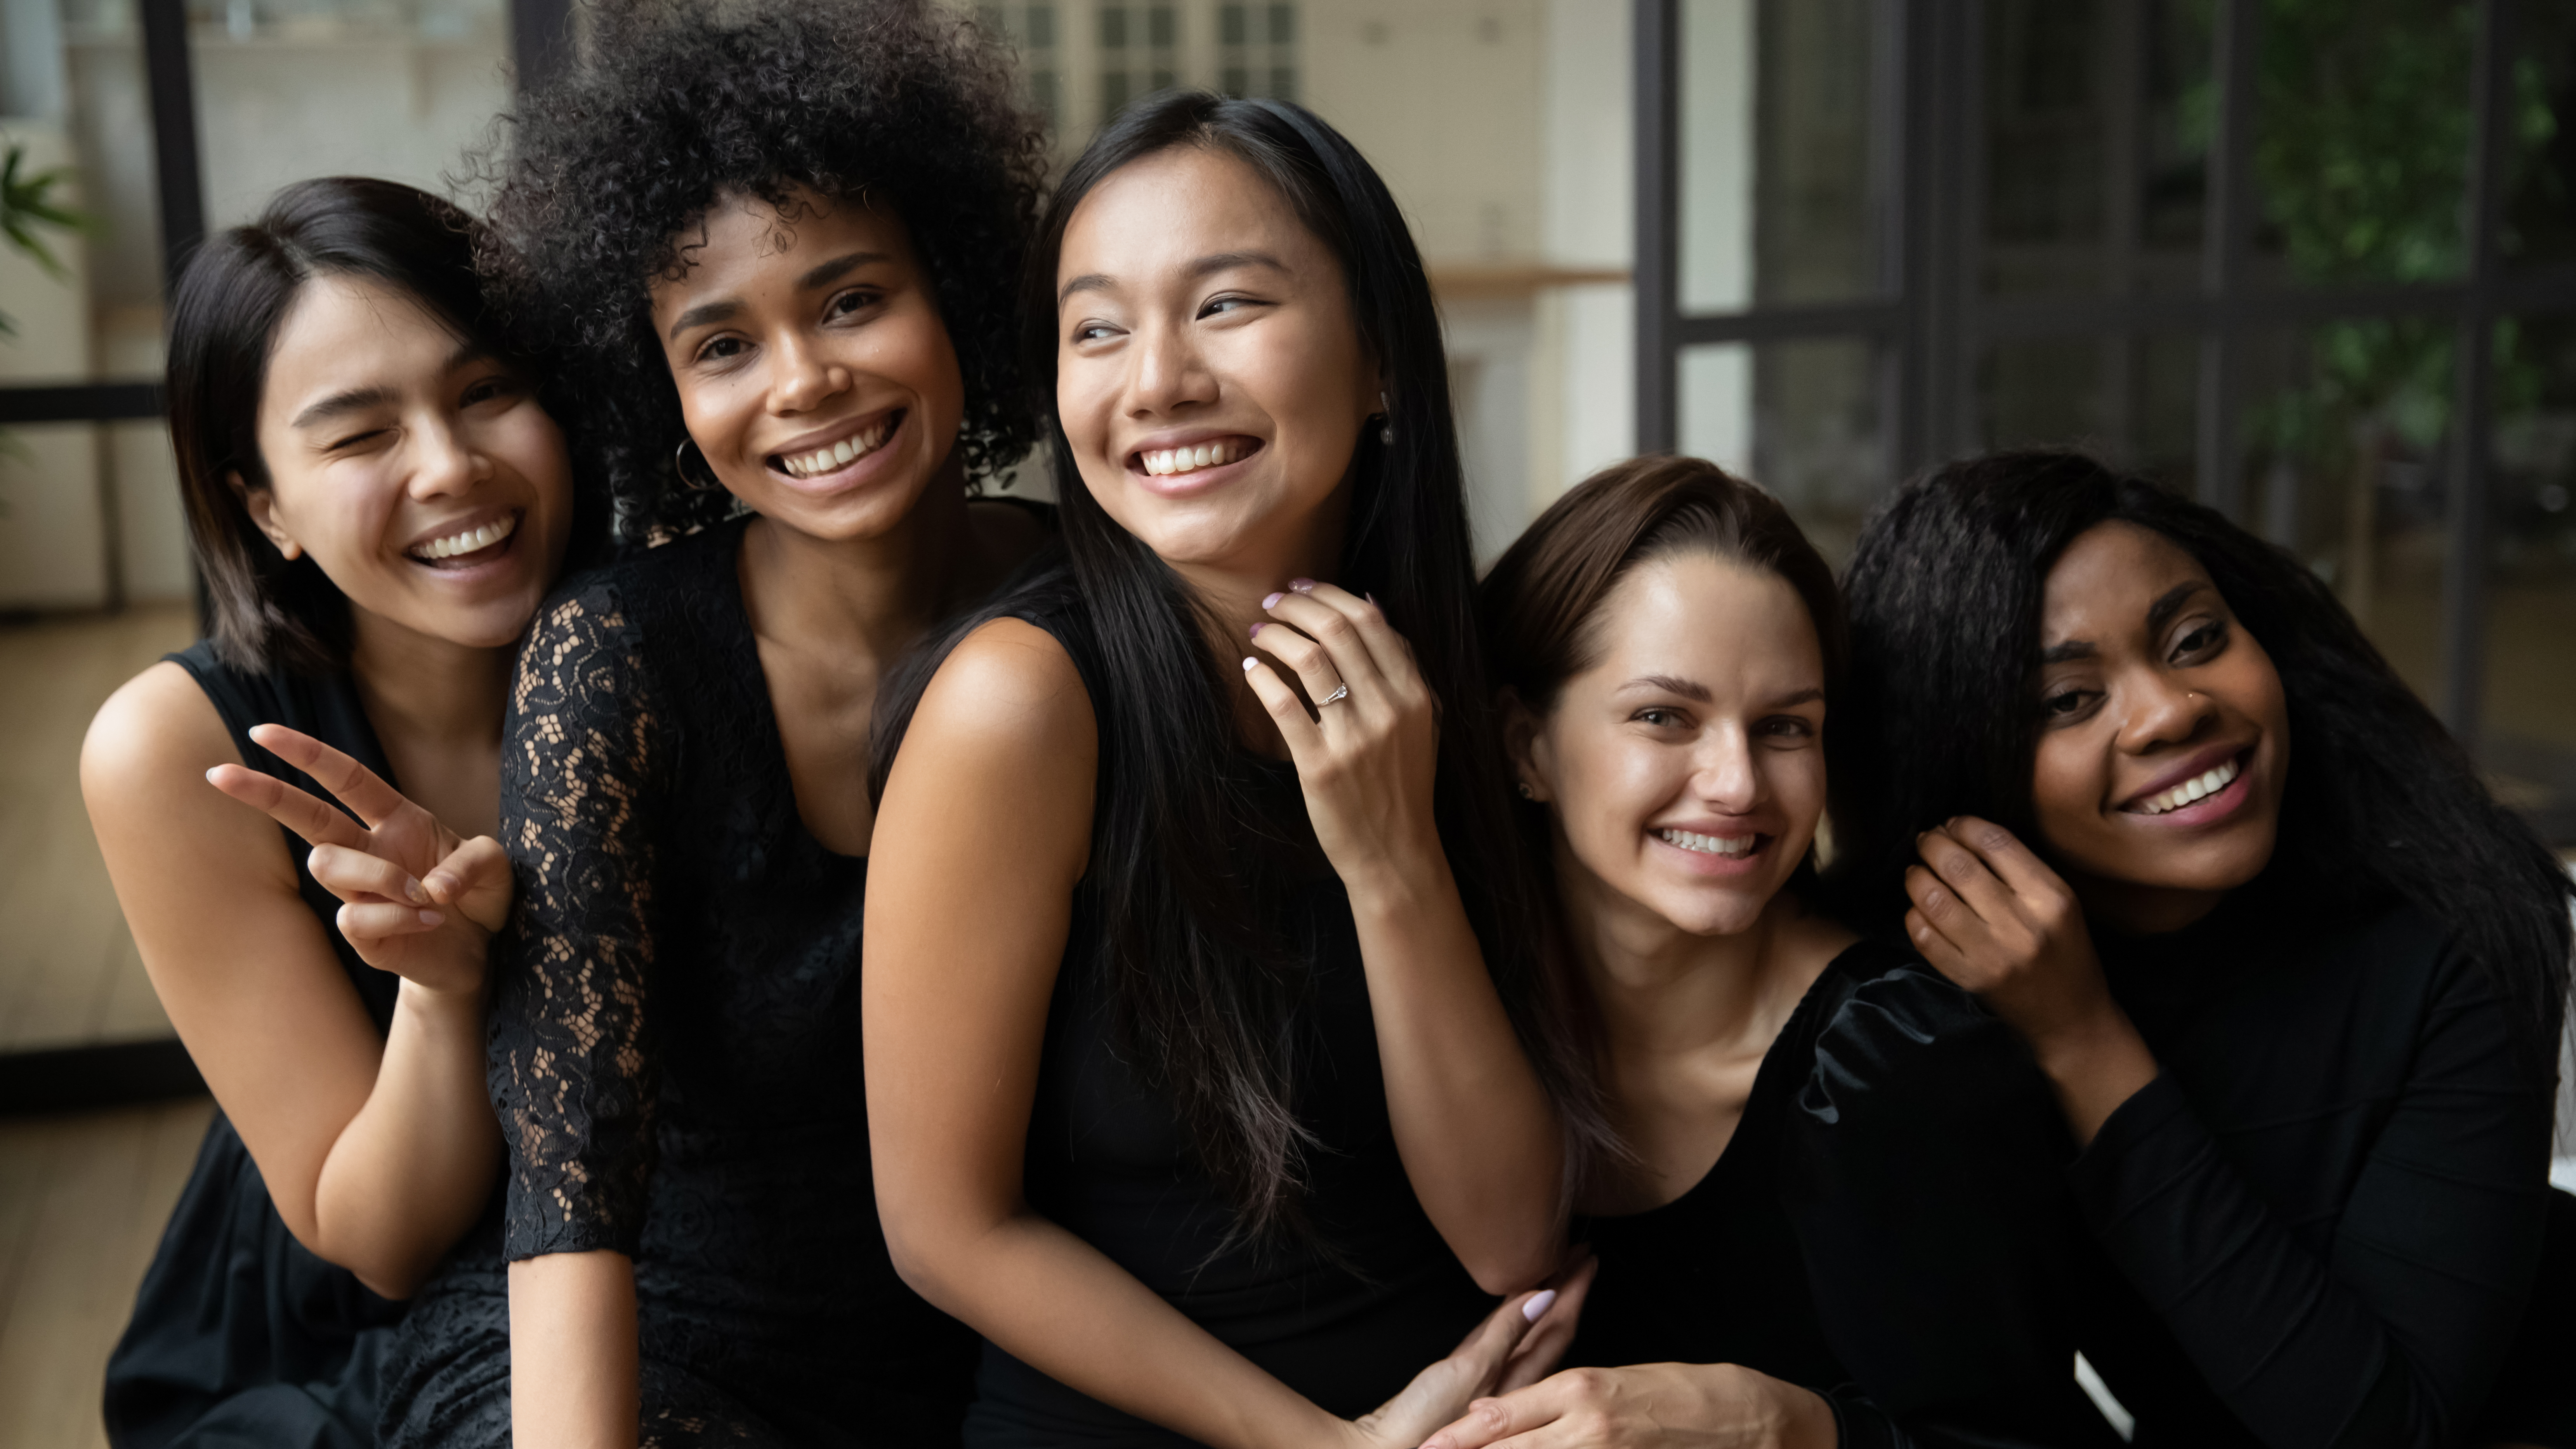 Women in black smiling while standing together | Source: Shutterstock